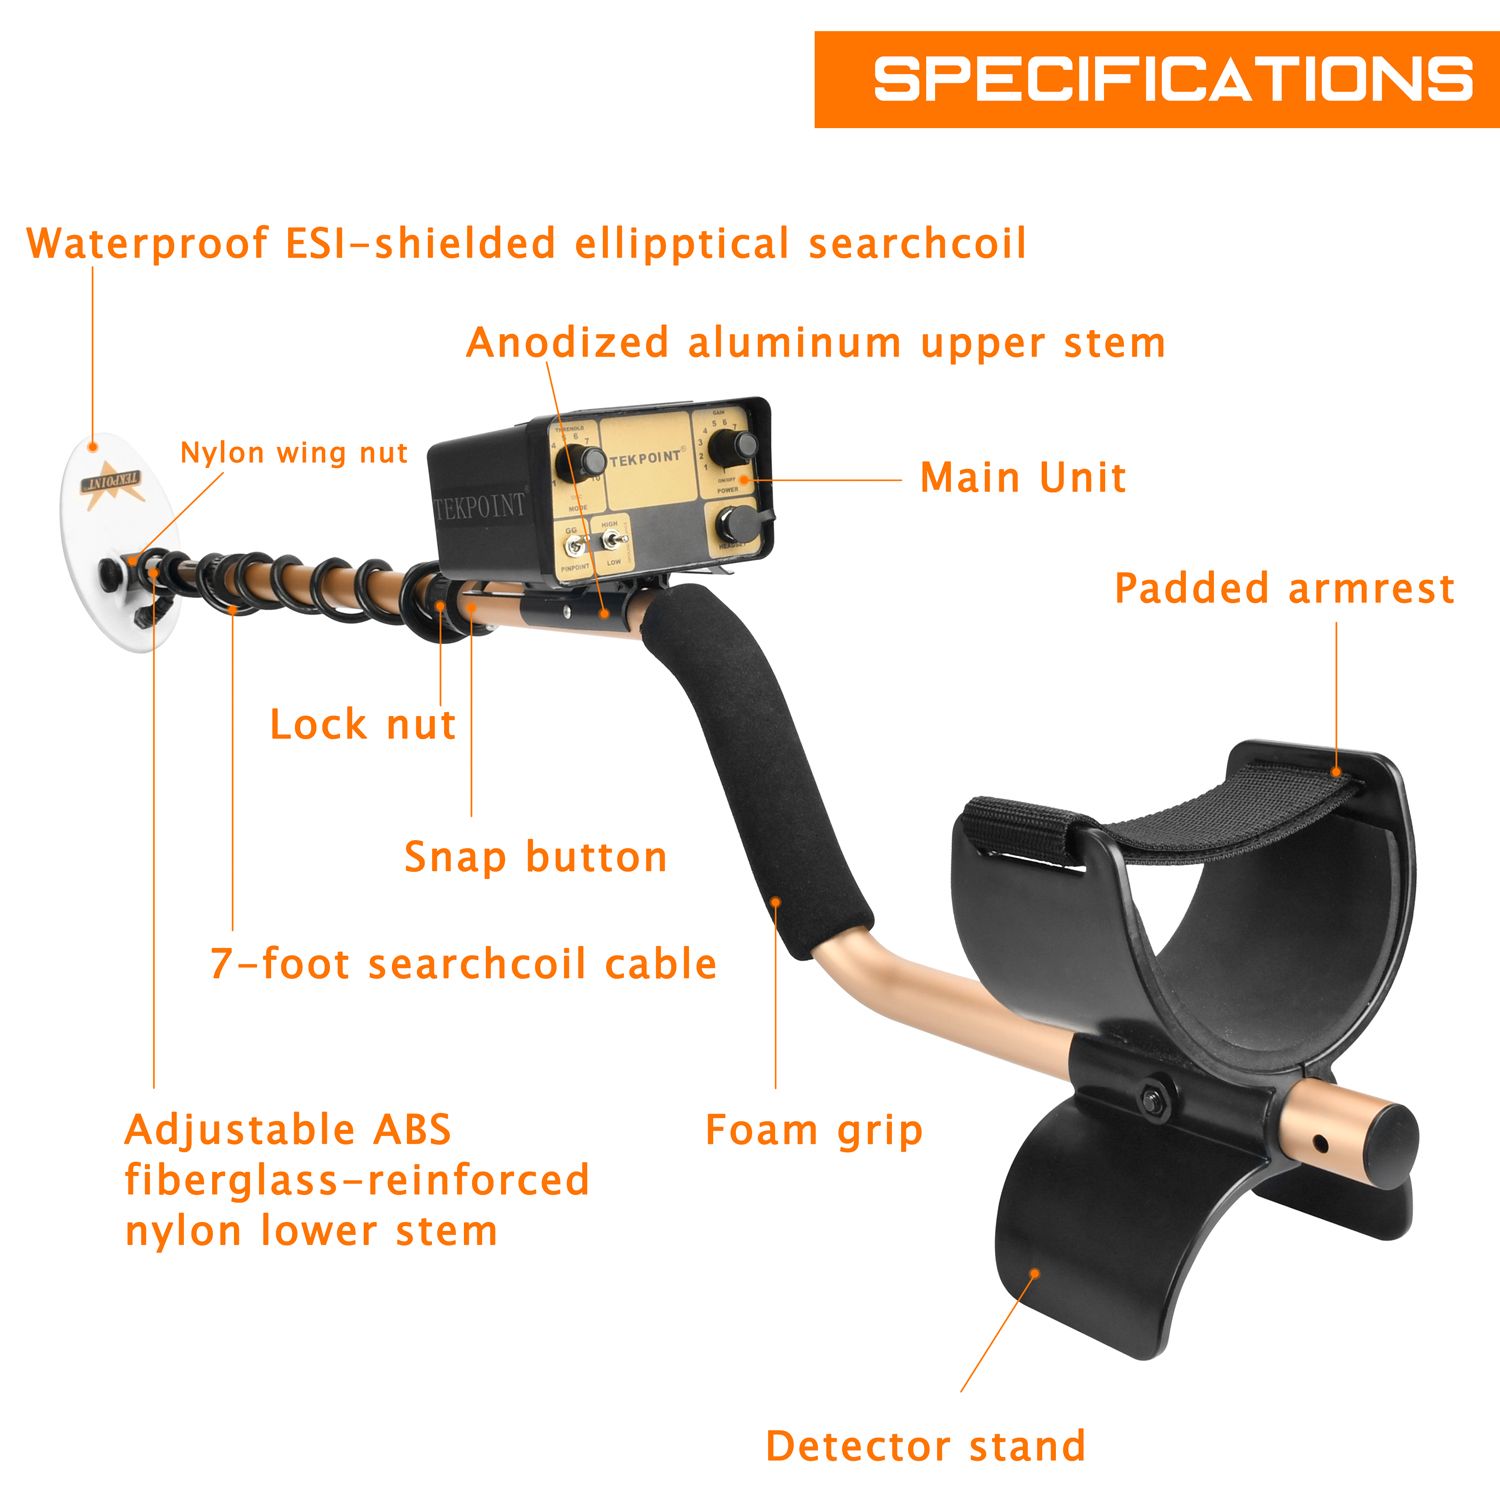 TEKPOINT-2-Portable-Underground-Metal-Detector-High-Sensitivity-Gold-Detecting-Hunting-Tool-1731791